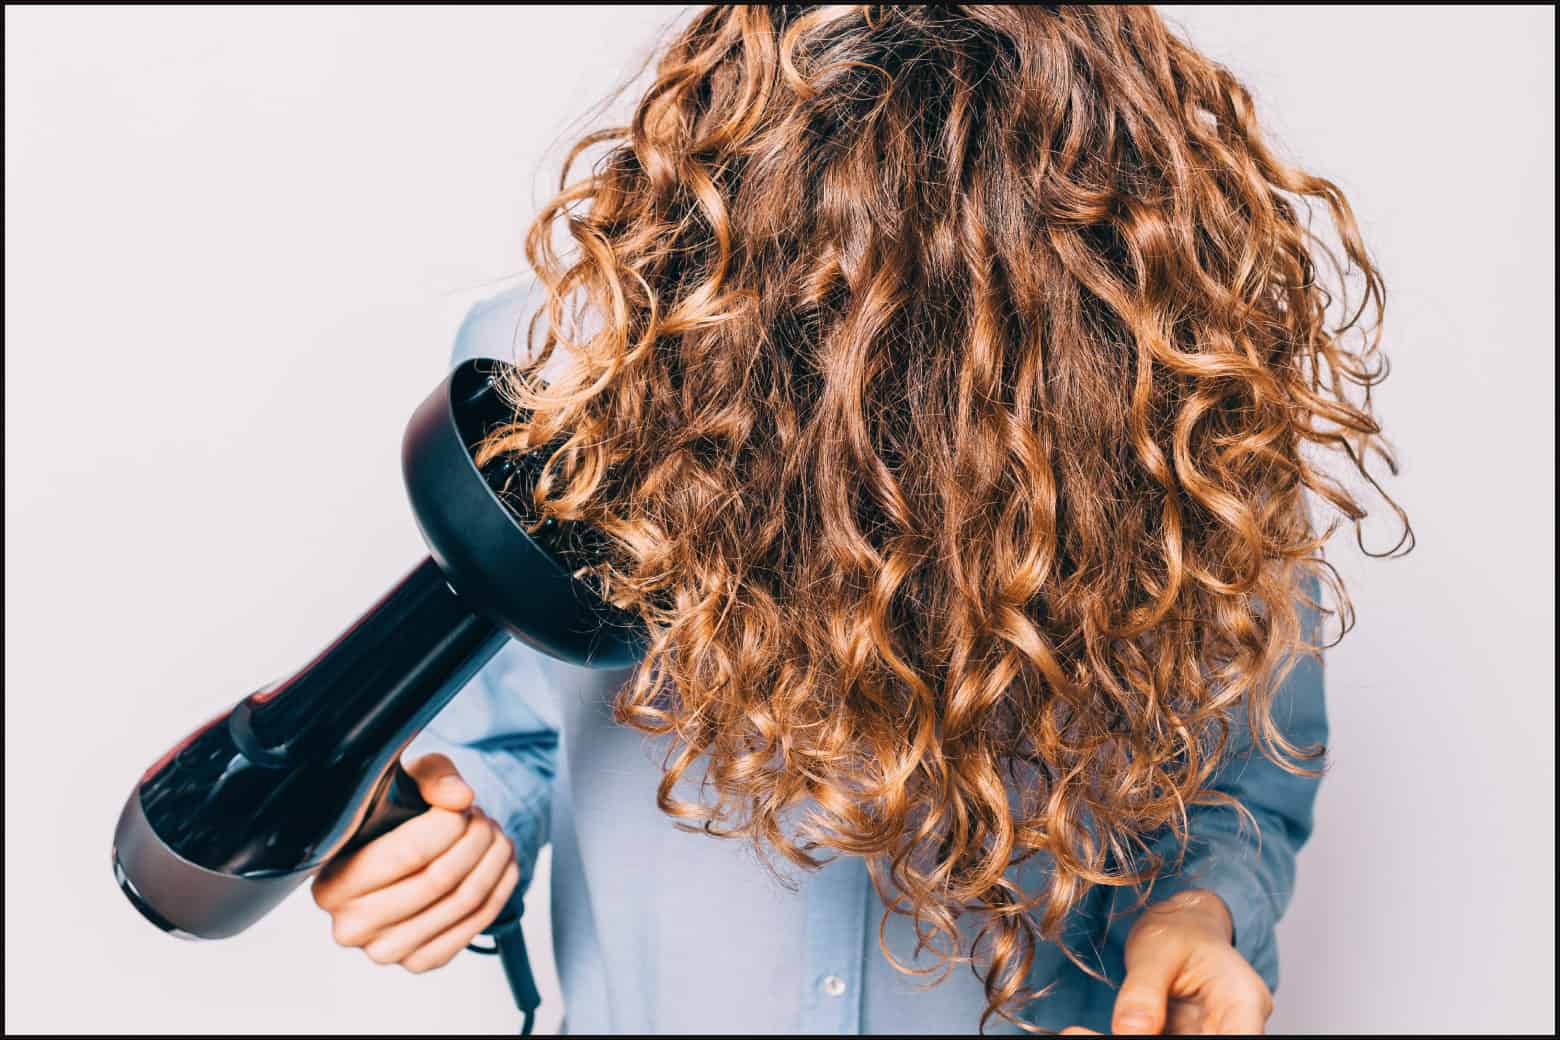 How Much Is a Perm? Your Guide to Costs and More - StyleSeat